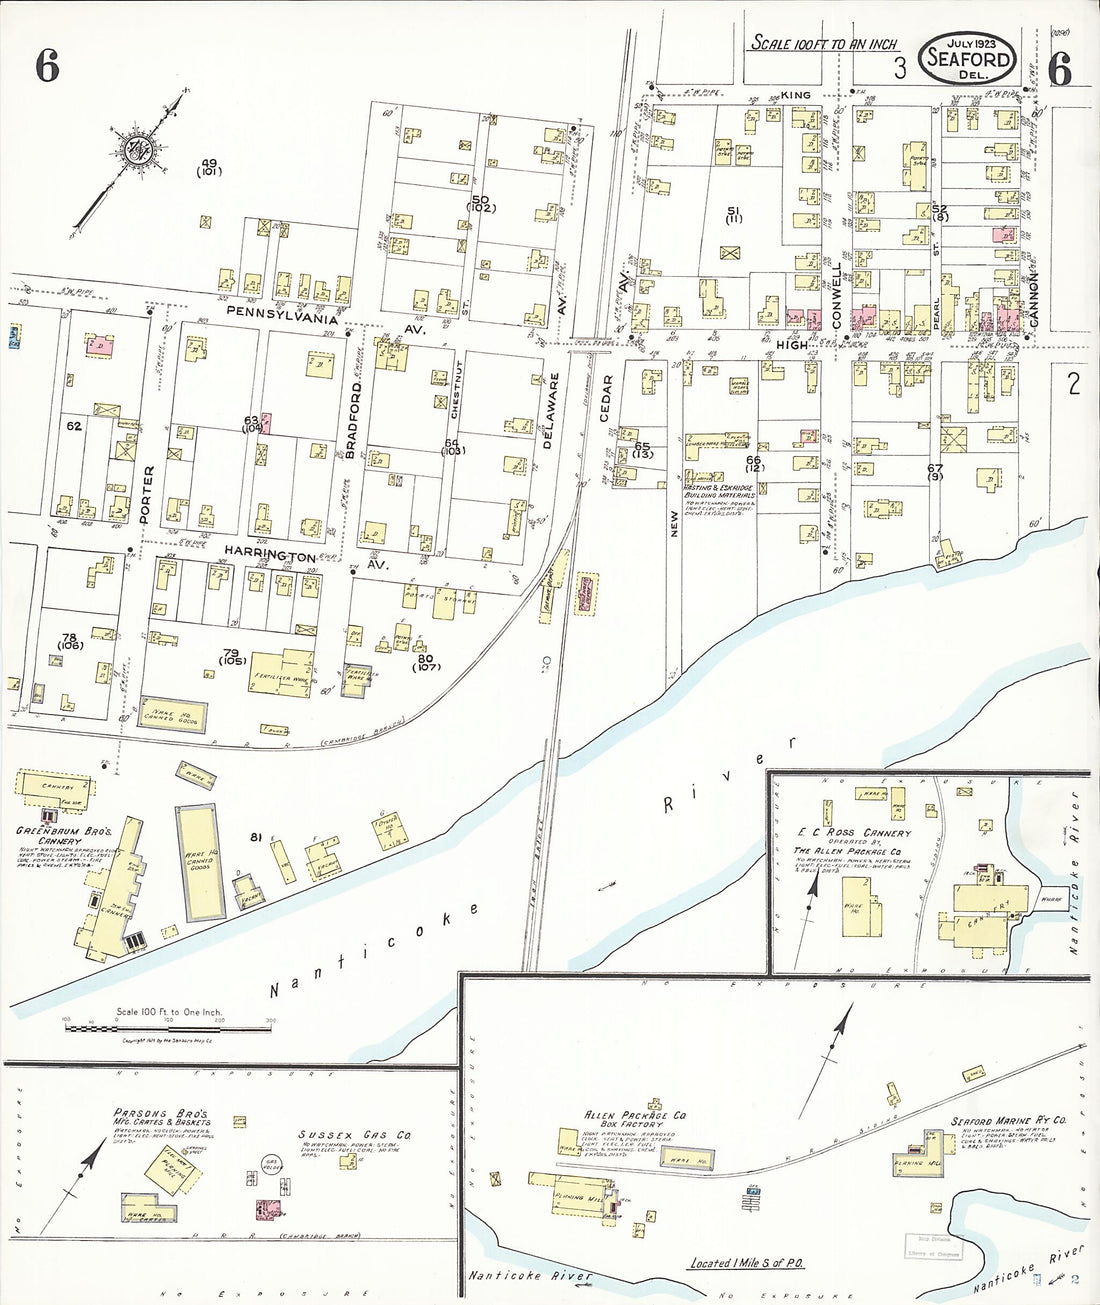 This old map of Seaford, Sussex County, Delaware was created by Sanborn Map Company in 1923